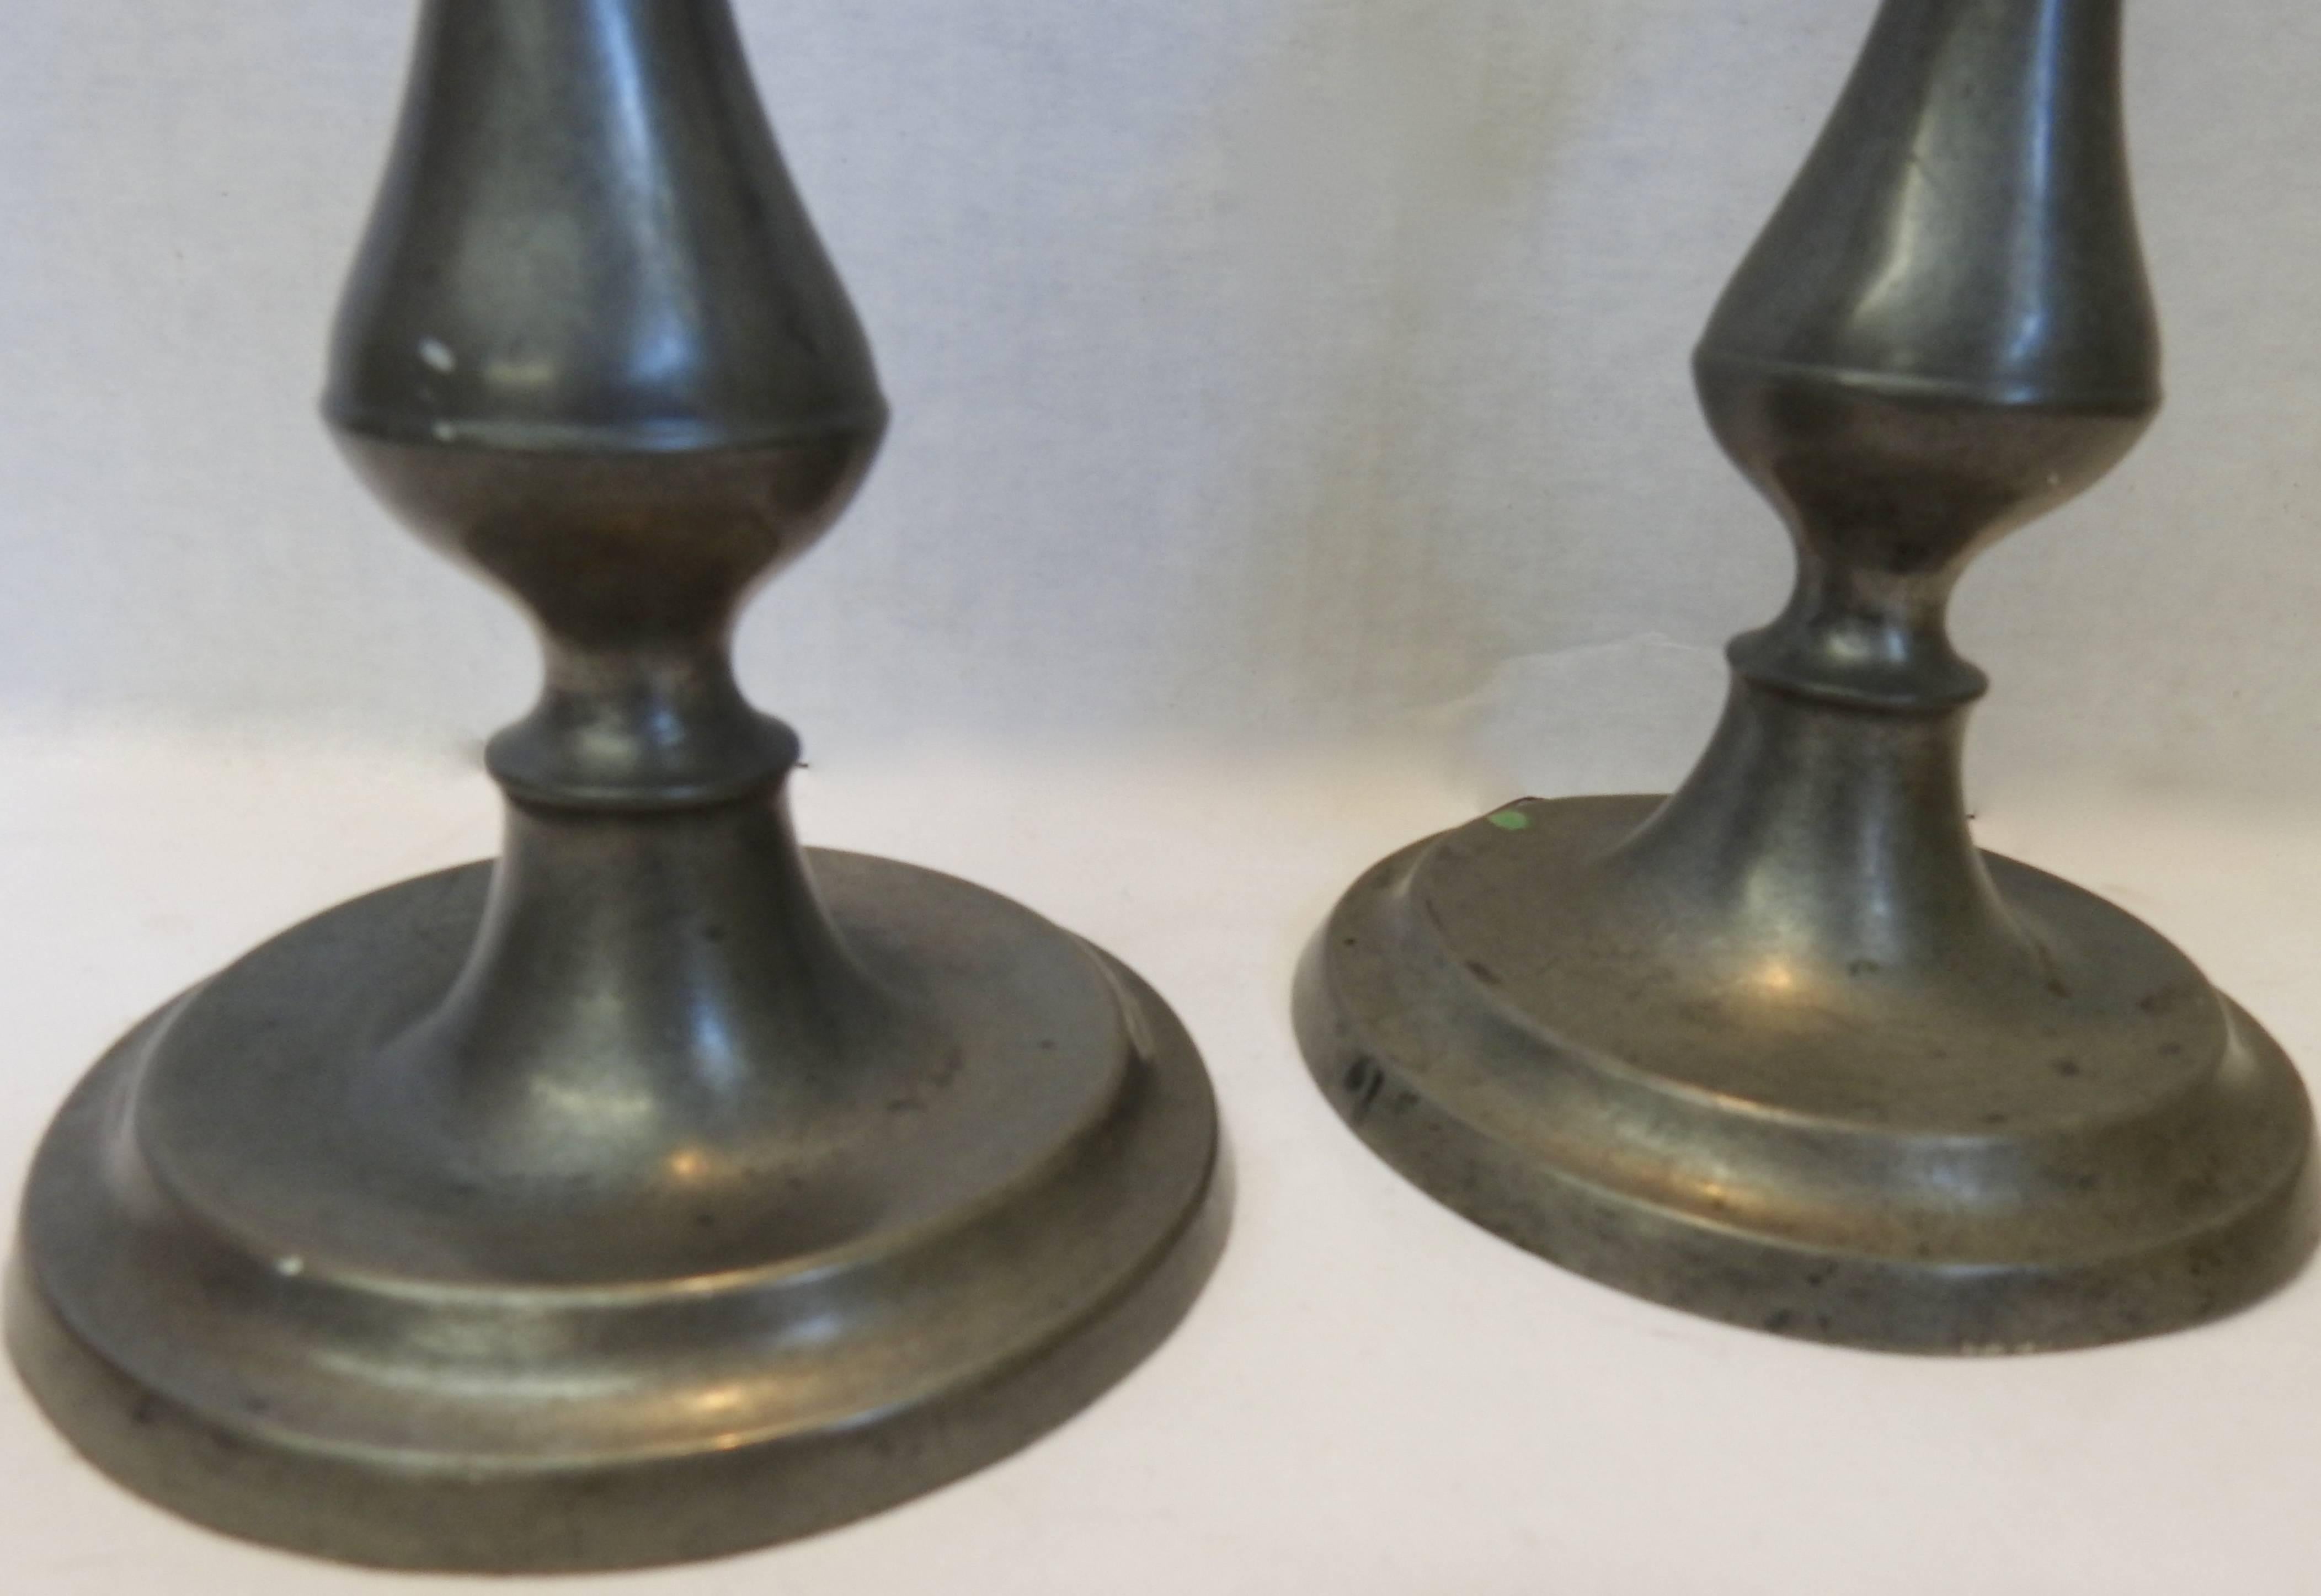 This is a Classic pair of pewter candlesticks to grace your surroundings. The smooth lines will look stunning anyway you choose to display them.